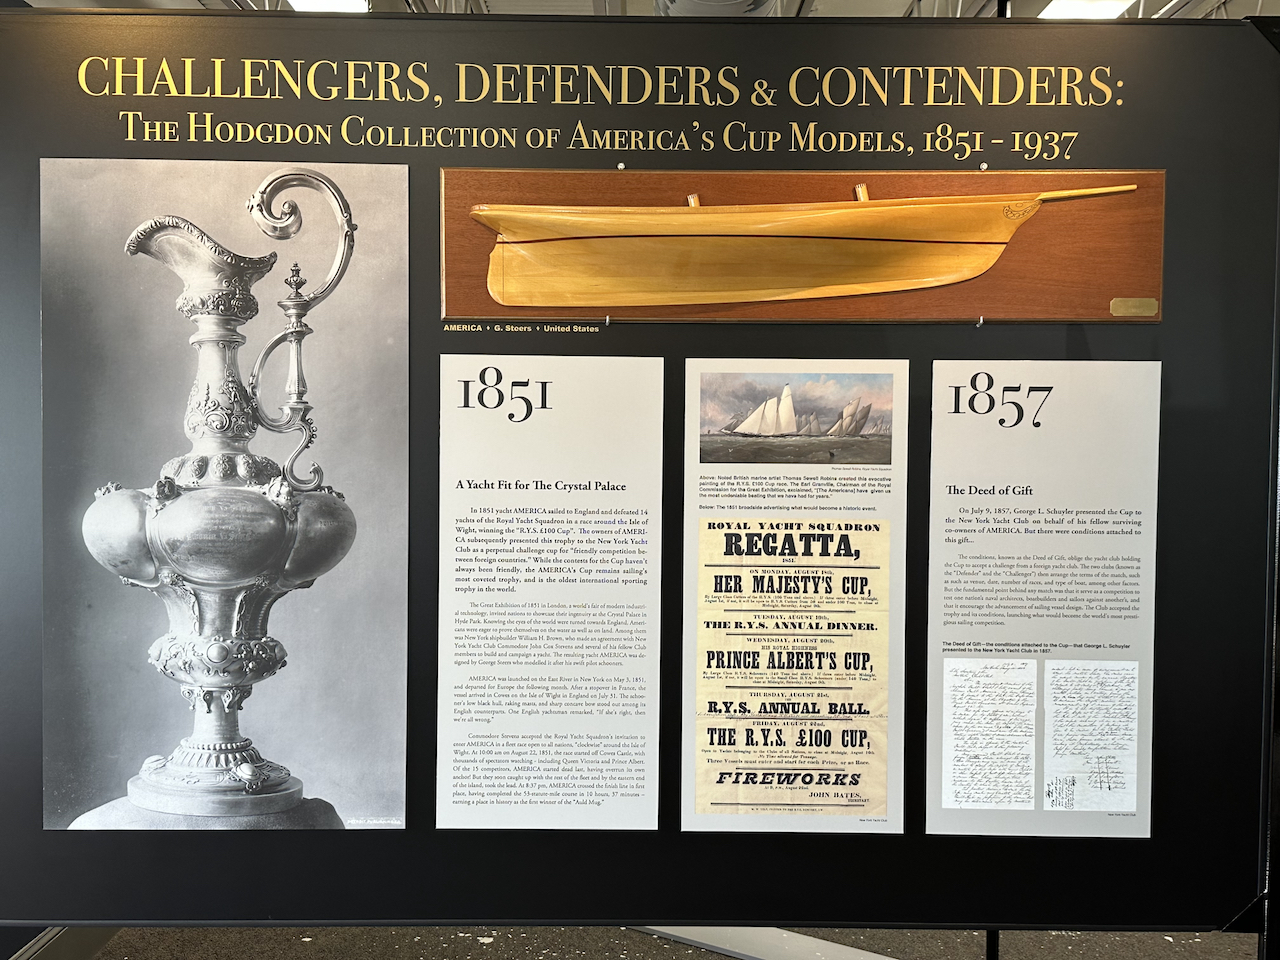 Herreshoff Marine Museum Unveils “Challengers, Defenders, and Contenders: The Hodgdon Collection of America’s Cup Models – 1851-1937” Exhibit